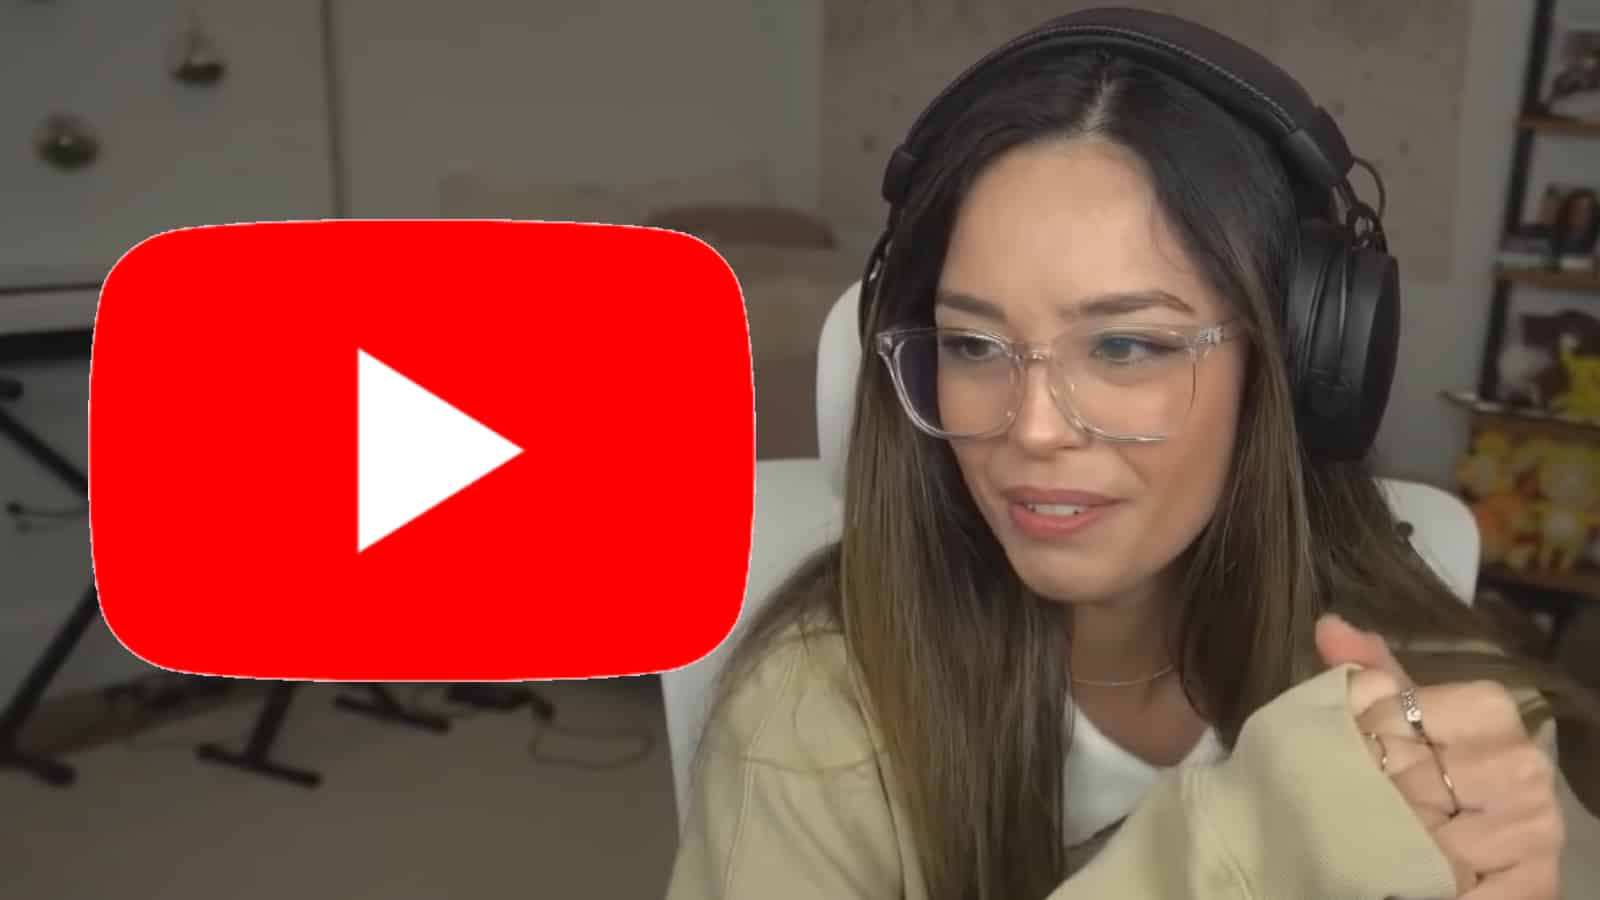 Valkyrae streaming, with the YouTube logo imposed on the left.